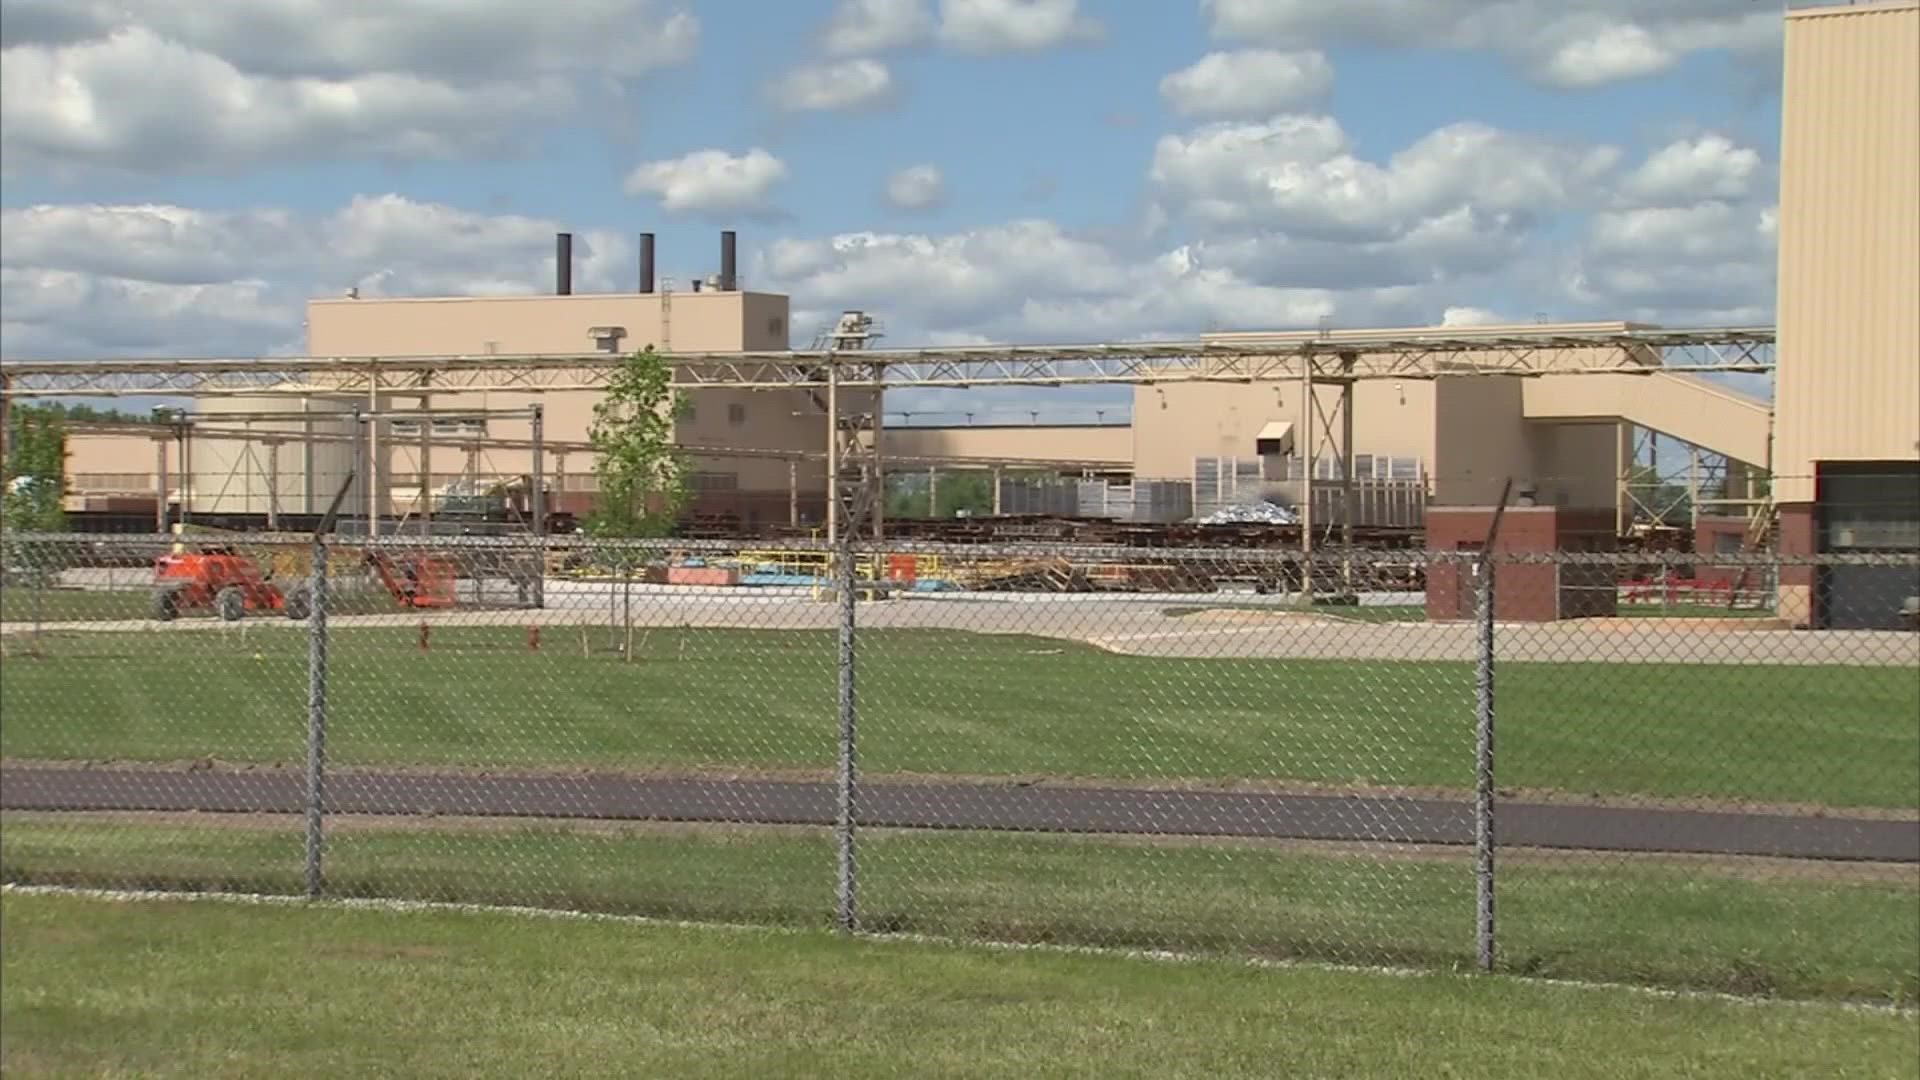 The company plans to invest nearly $500 million dollars to expand and upgrade its operations in Marion.